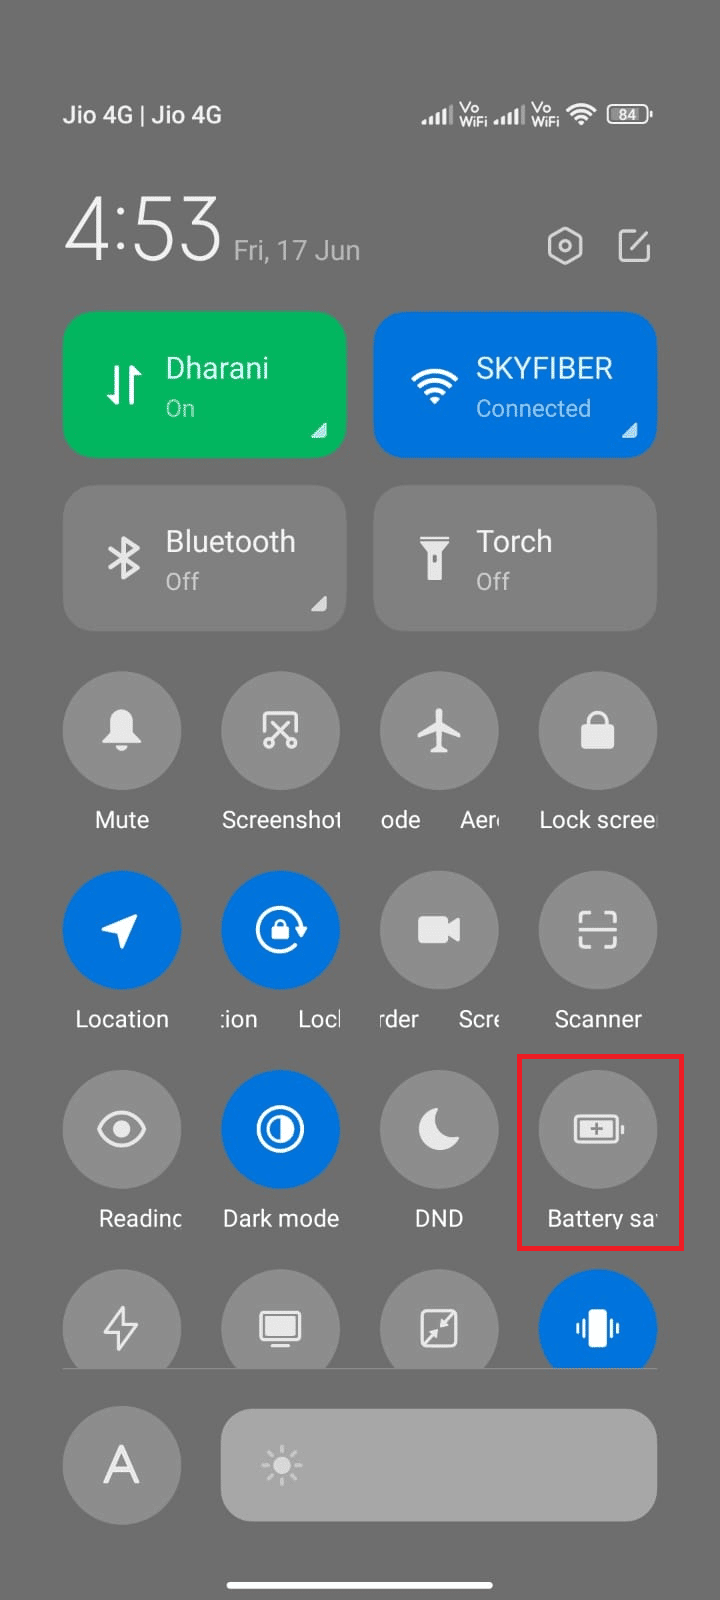 tap on the Battery saver setting